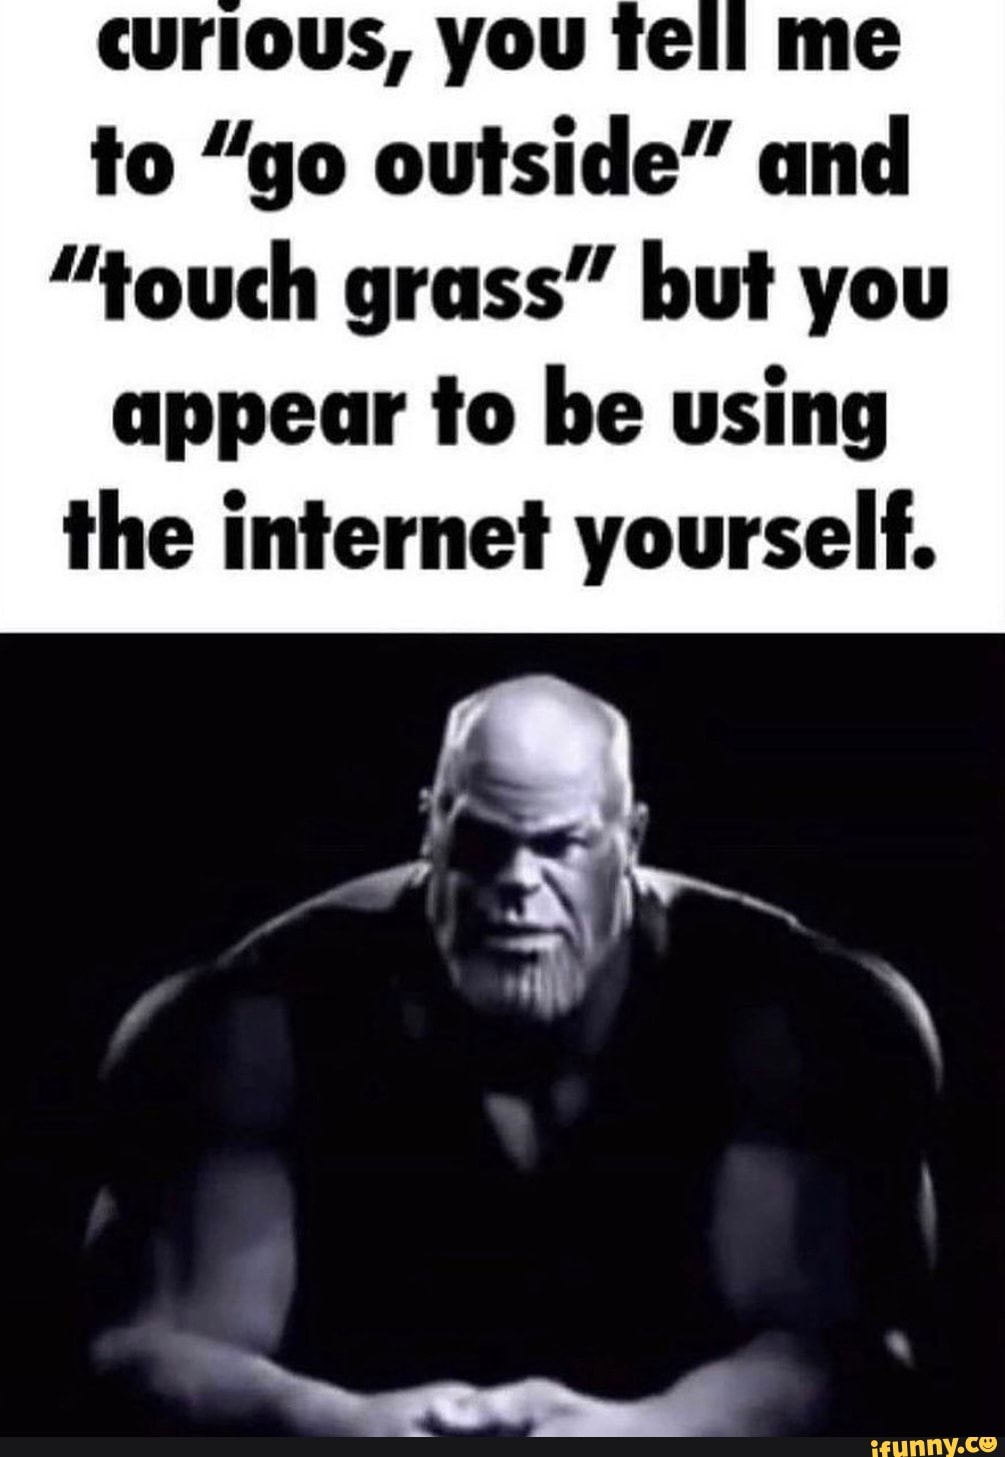 Touch grass - iFunny Brazil